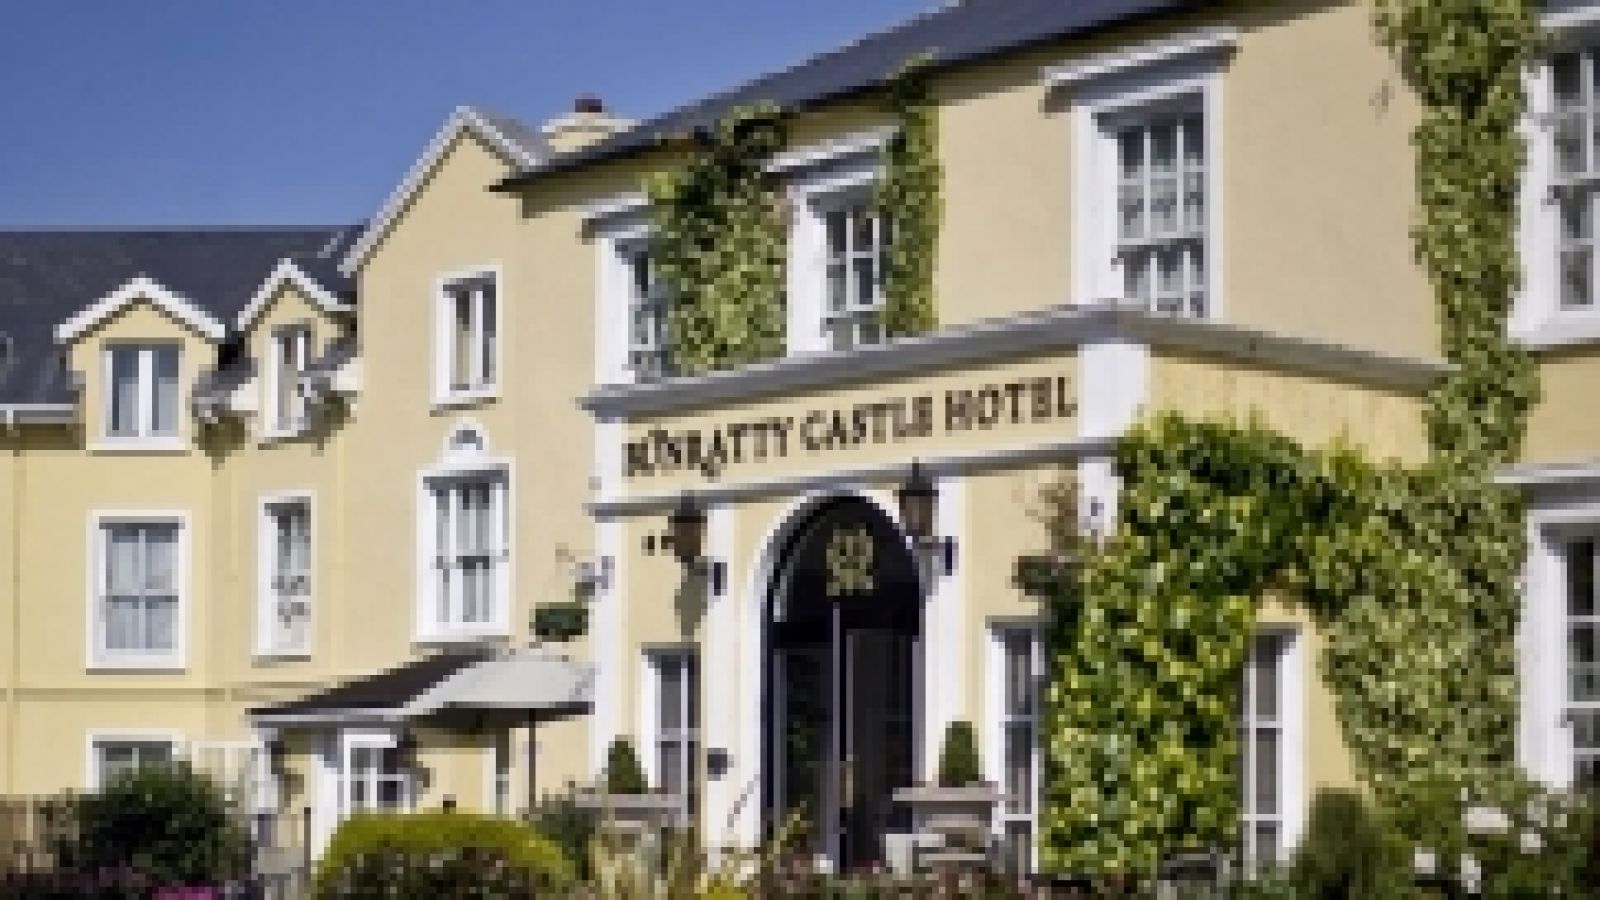 Bunratty Castle Hotel - Ireland golf packages